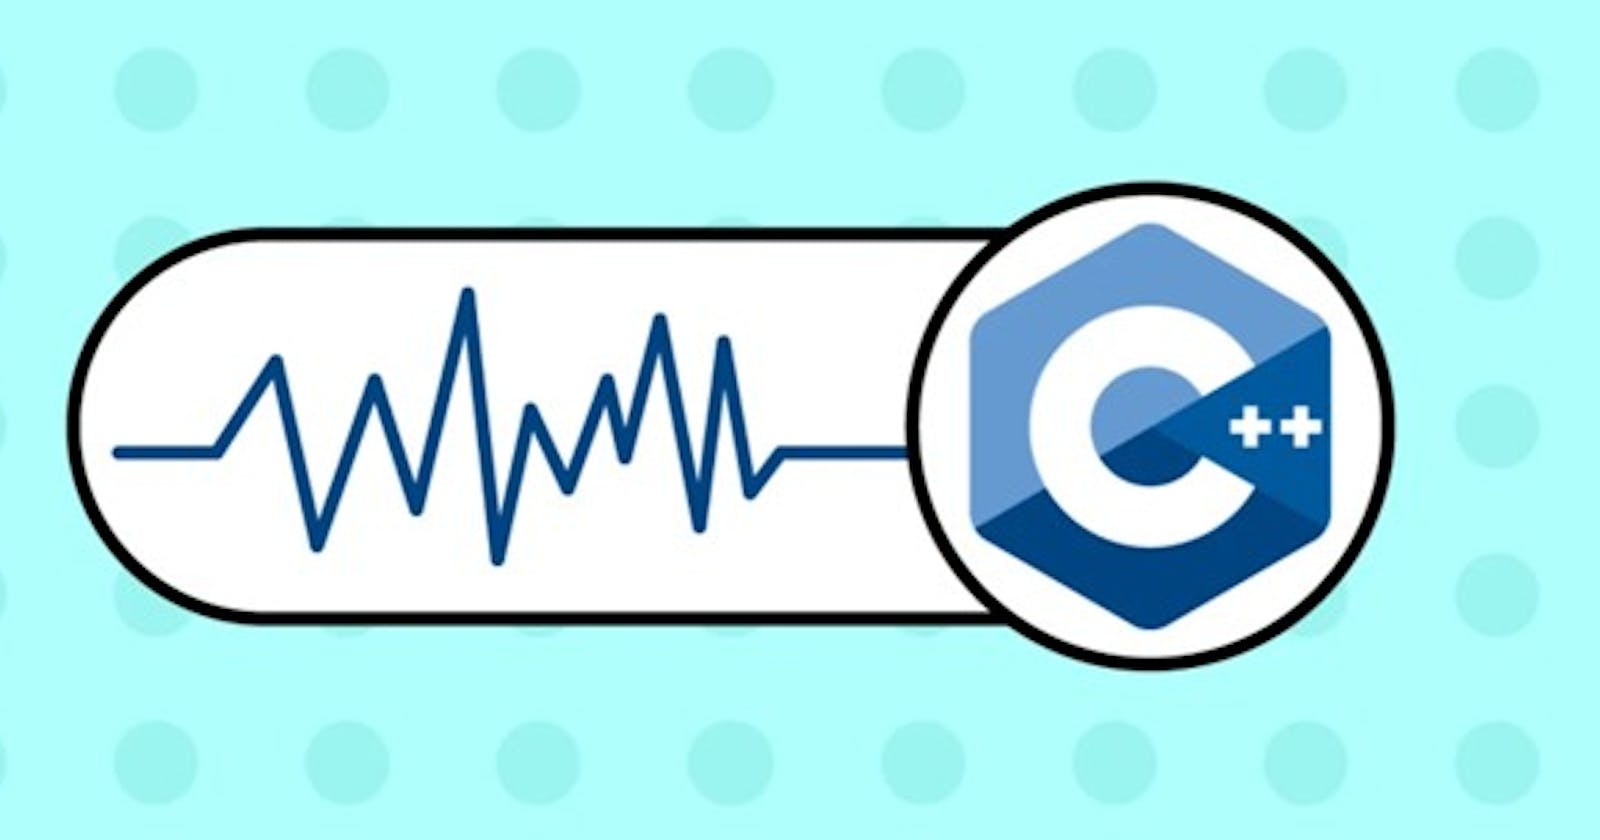 5 reasons you should use C++ for digital signal processing